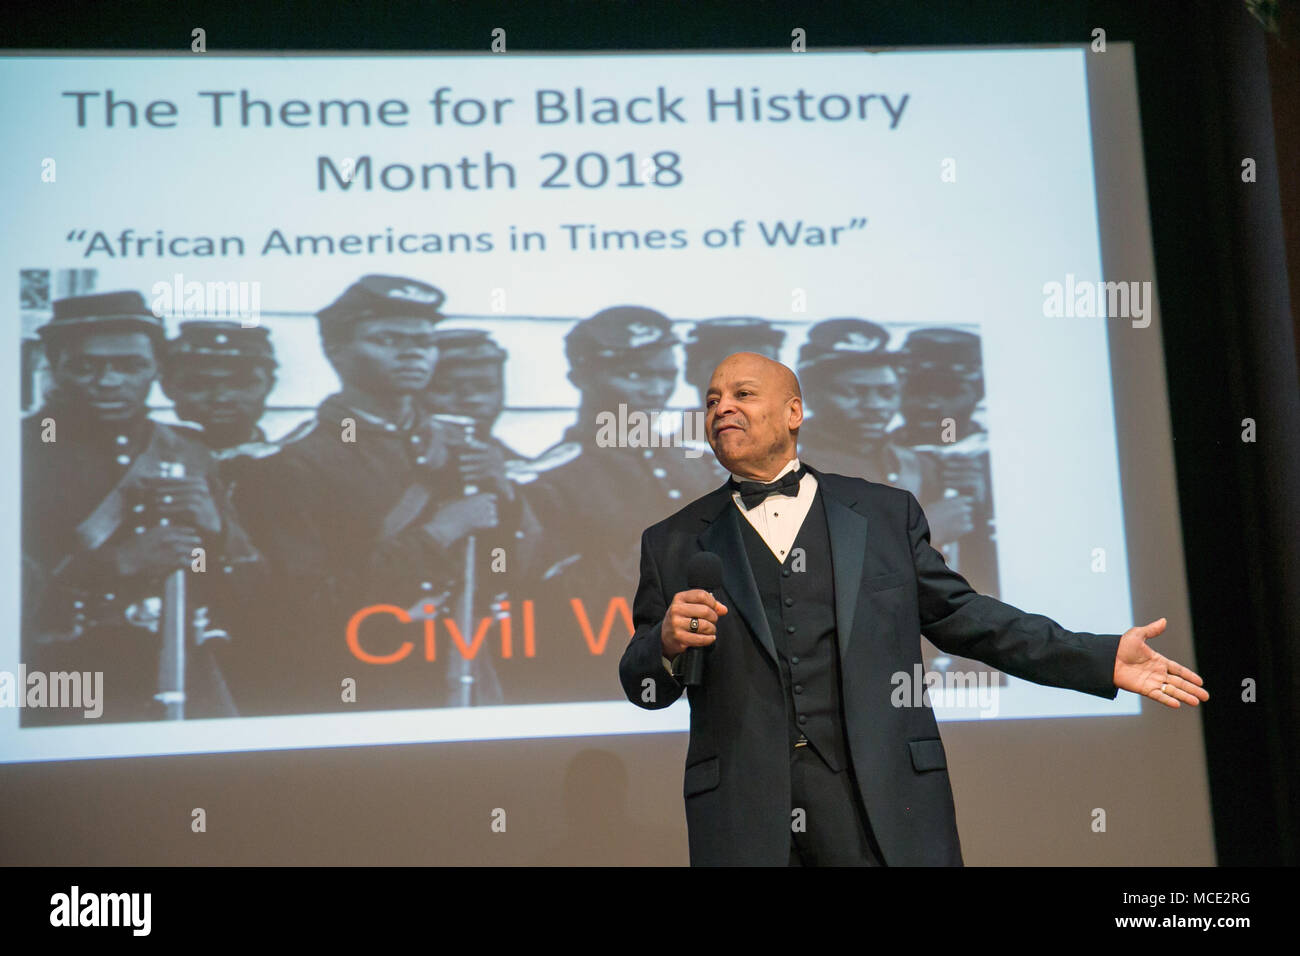 Mr. Harvey Alston, a motivational speaker, educator and former football coach, gives words of encouragement as the guest speaker for Team Redstone's Black History Month celebration honoring 'African Americans in Times of War'  Feb. 28, 2018, at Redstone Arsenal, Alabama. (U.S. Army photo by Sgt. 1st Class Teddy Wade) Stock Photo